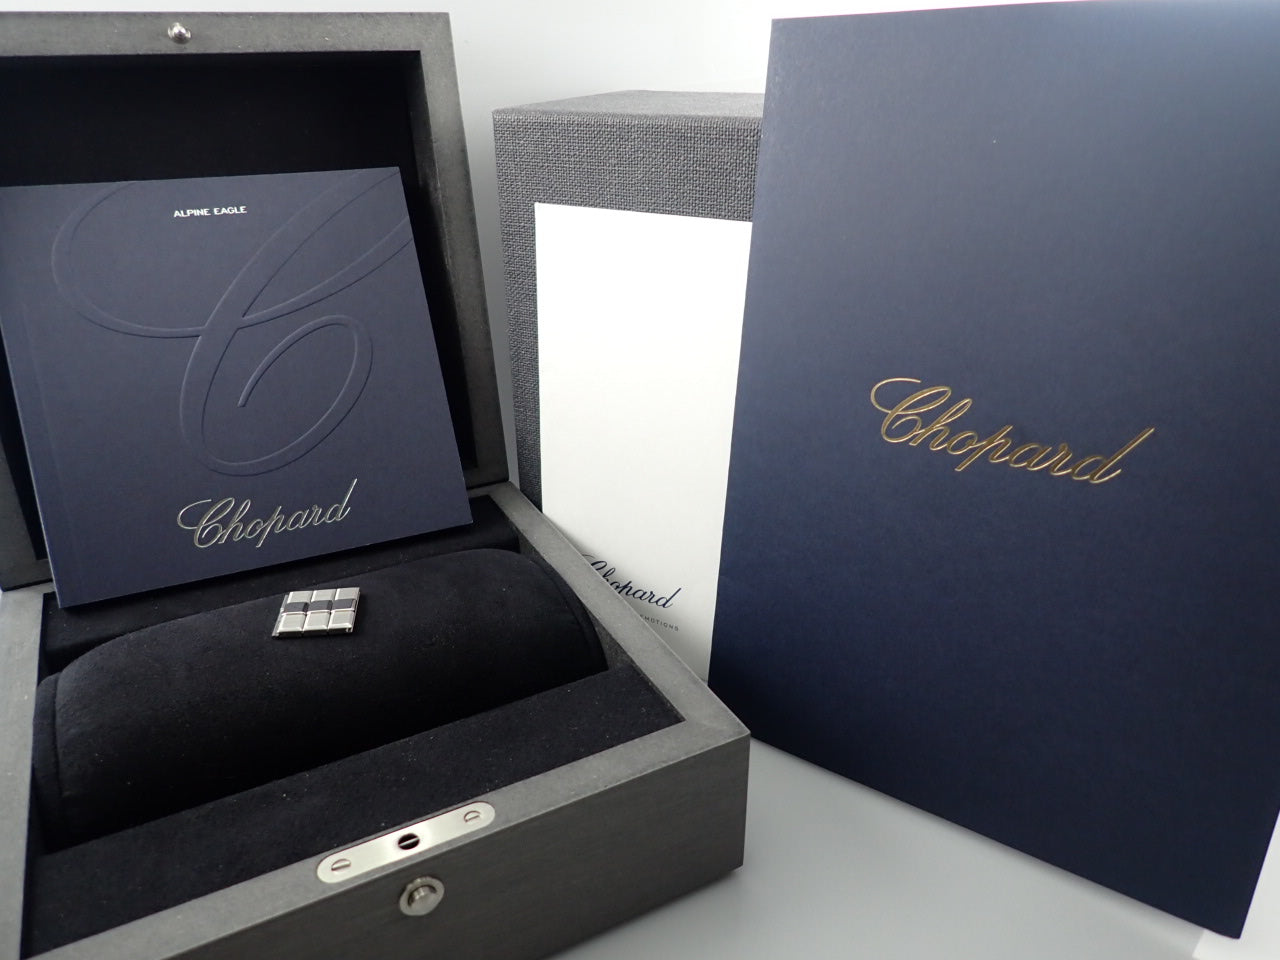 Chopard Alpine Eagle Large &lt;Warranty Box and Others&gt;